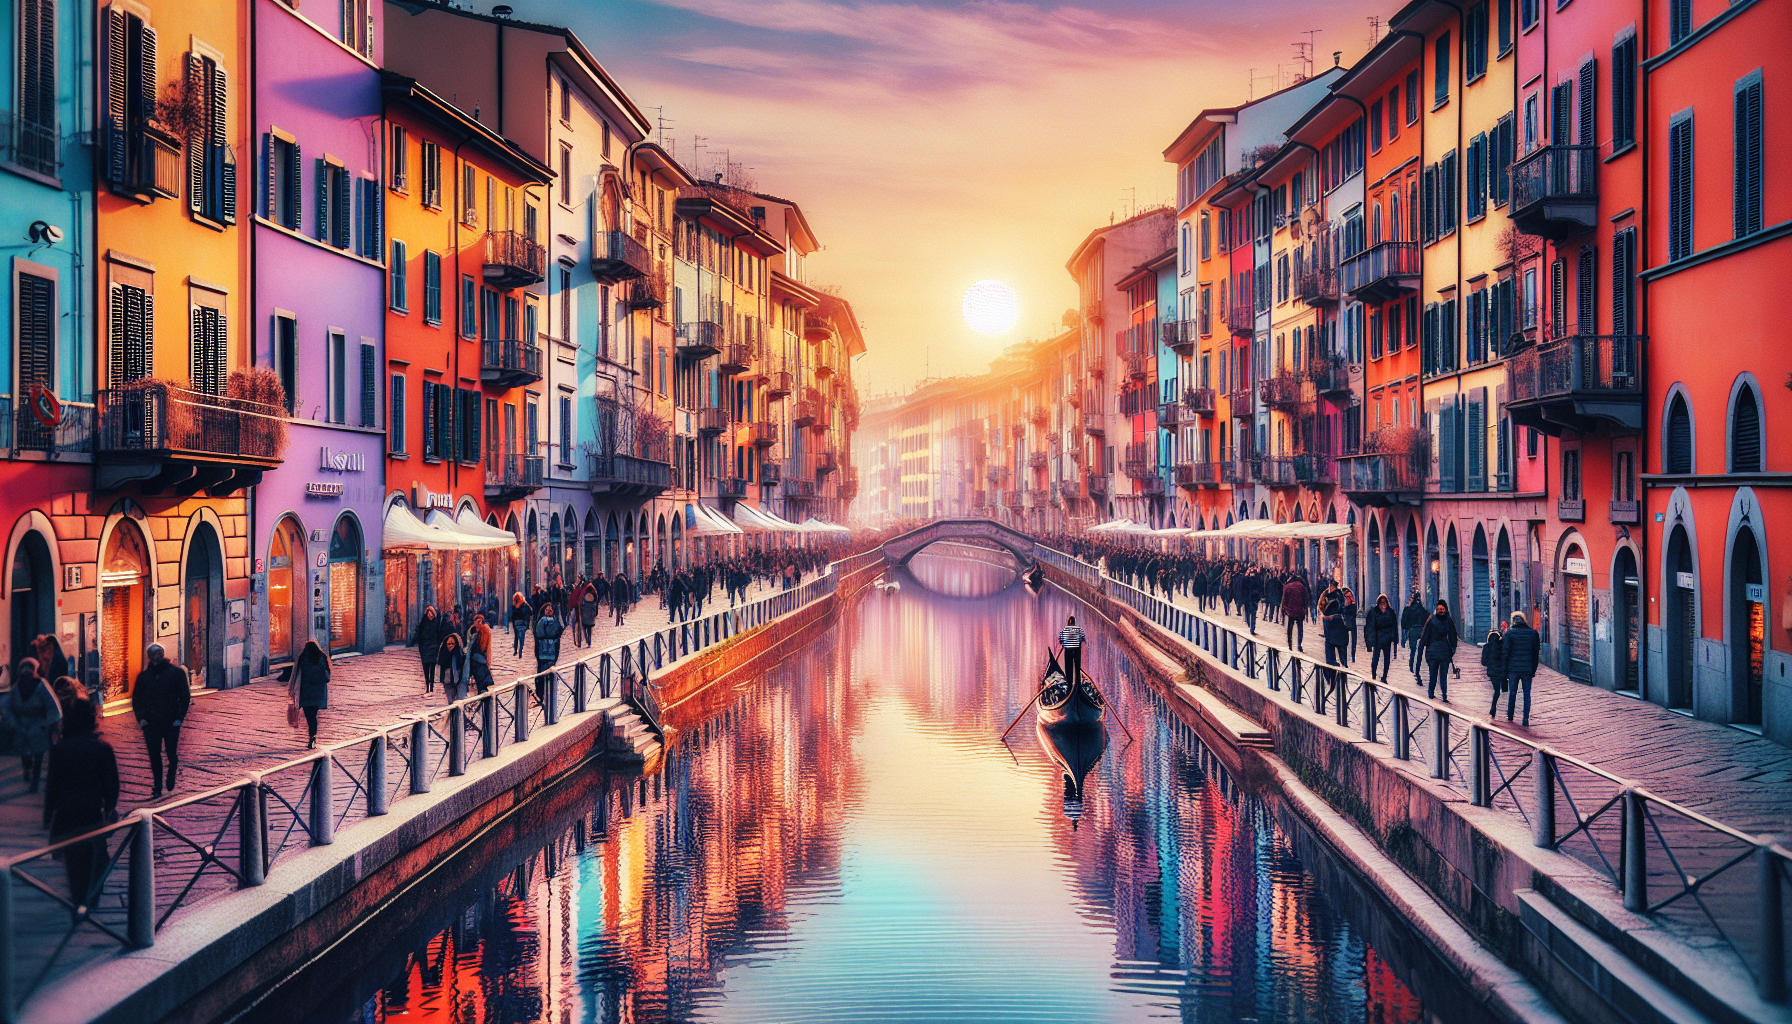 Navigli District: Waterways and Colorful Facades